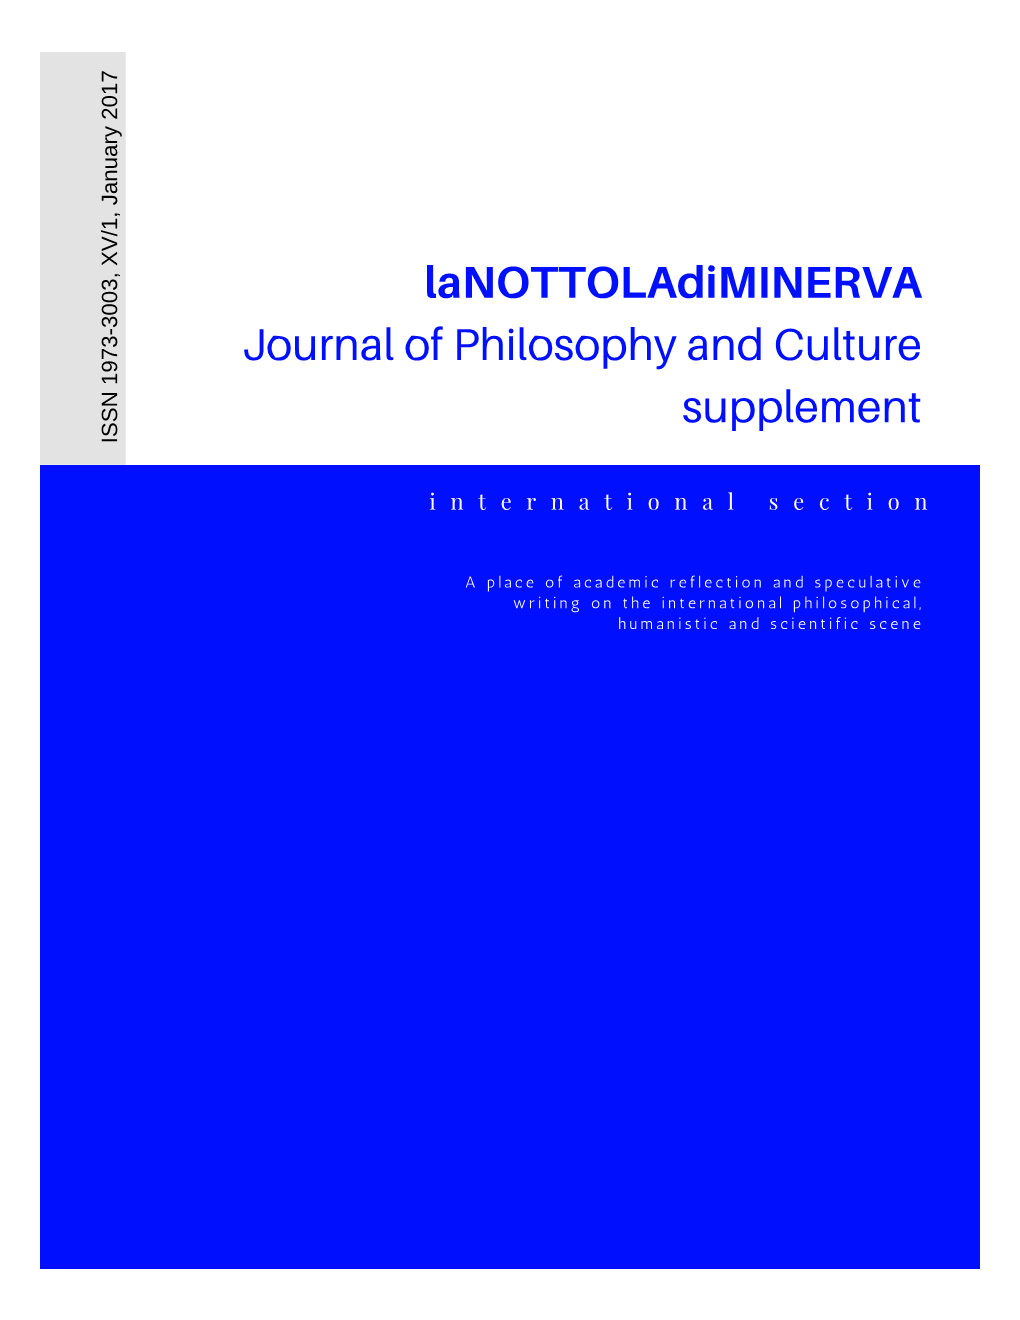 Lanottoladiminerva Journal of Philosophy and Culture Supplement ISSN 1973-3003